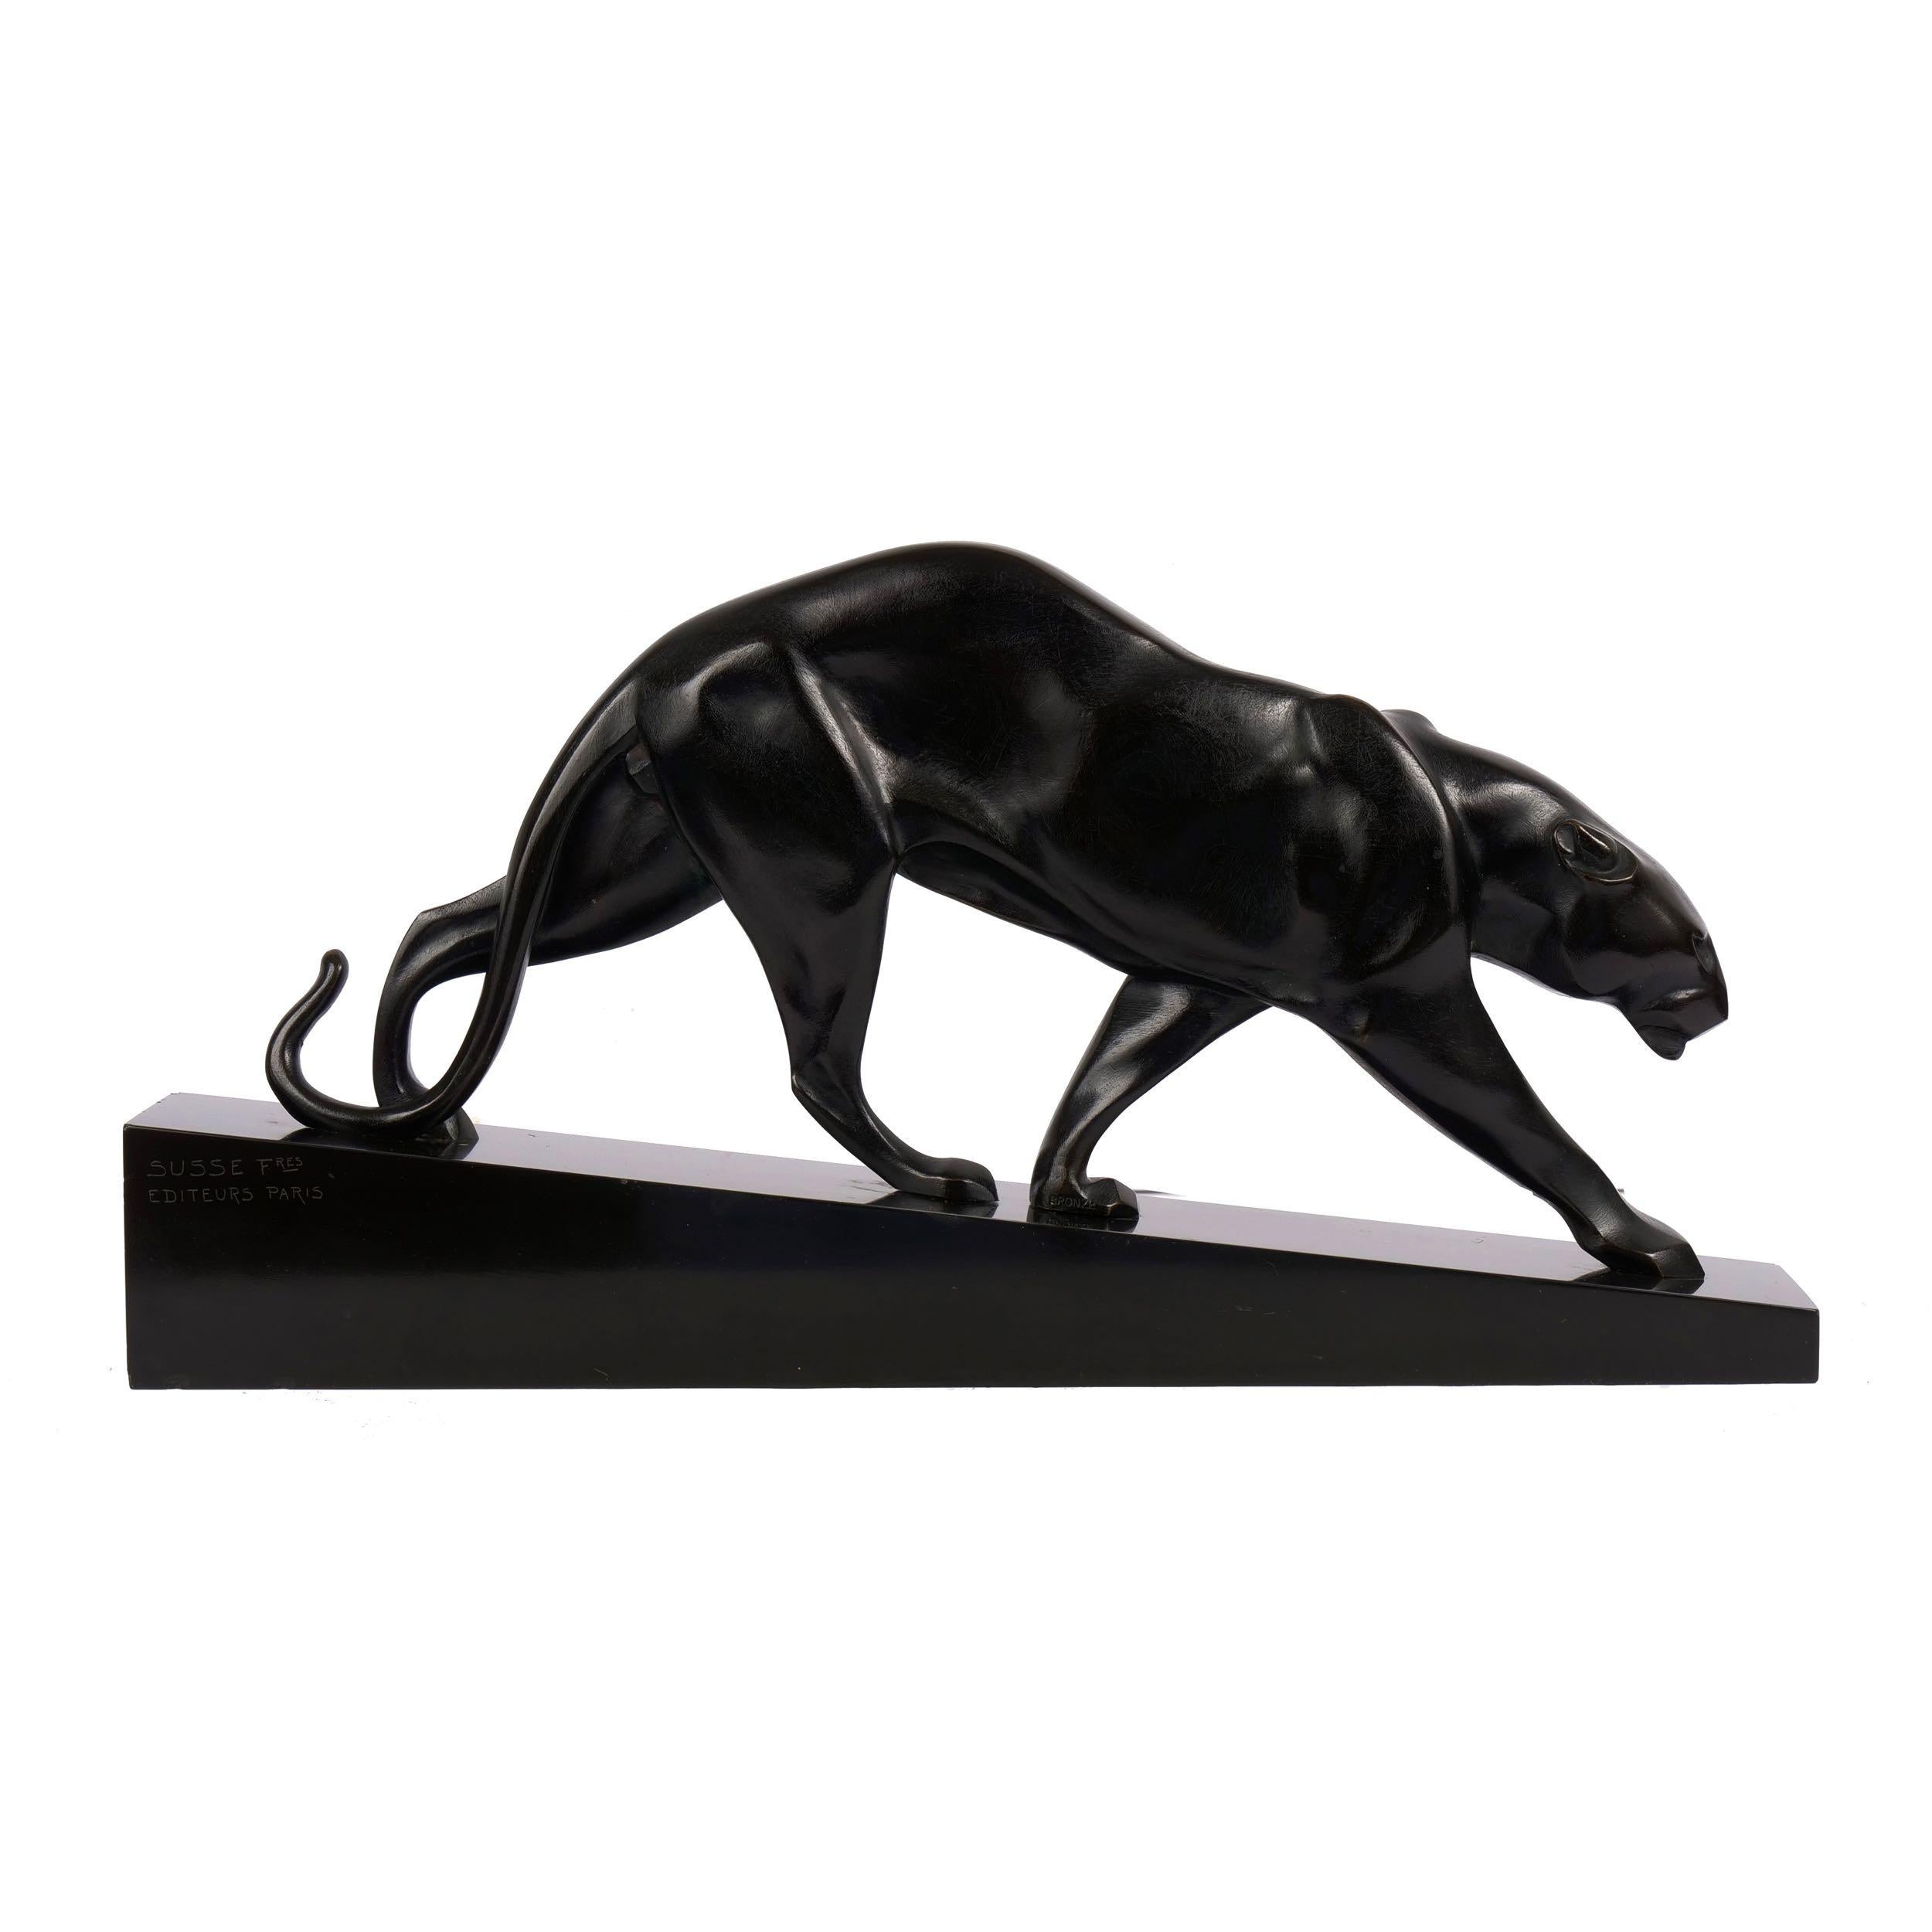 20th Century Art Deco “Panther Walking” French Bronze Sculpture by Maurice Prost & S. Freres